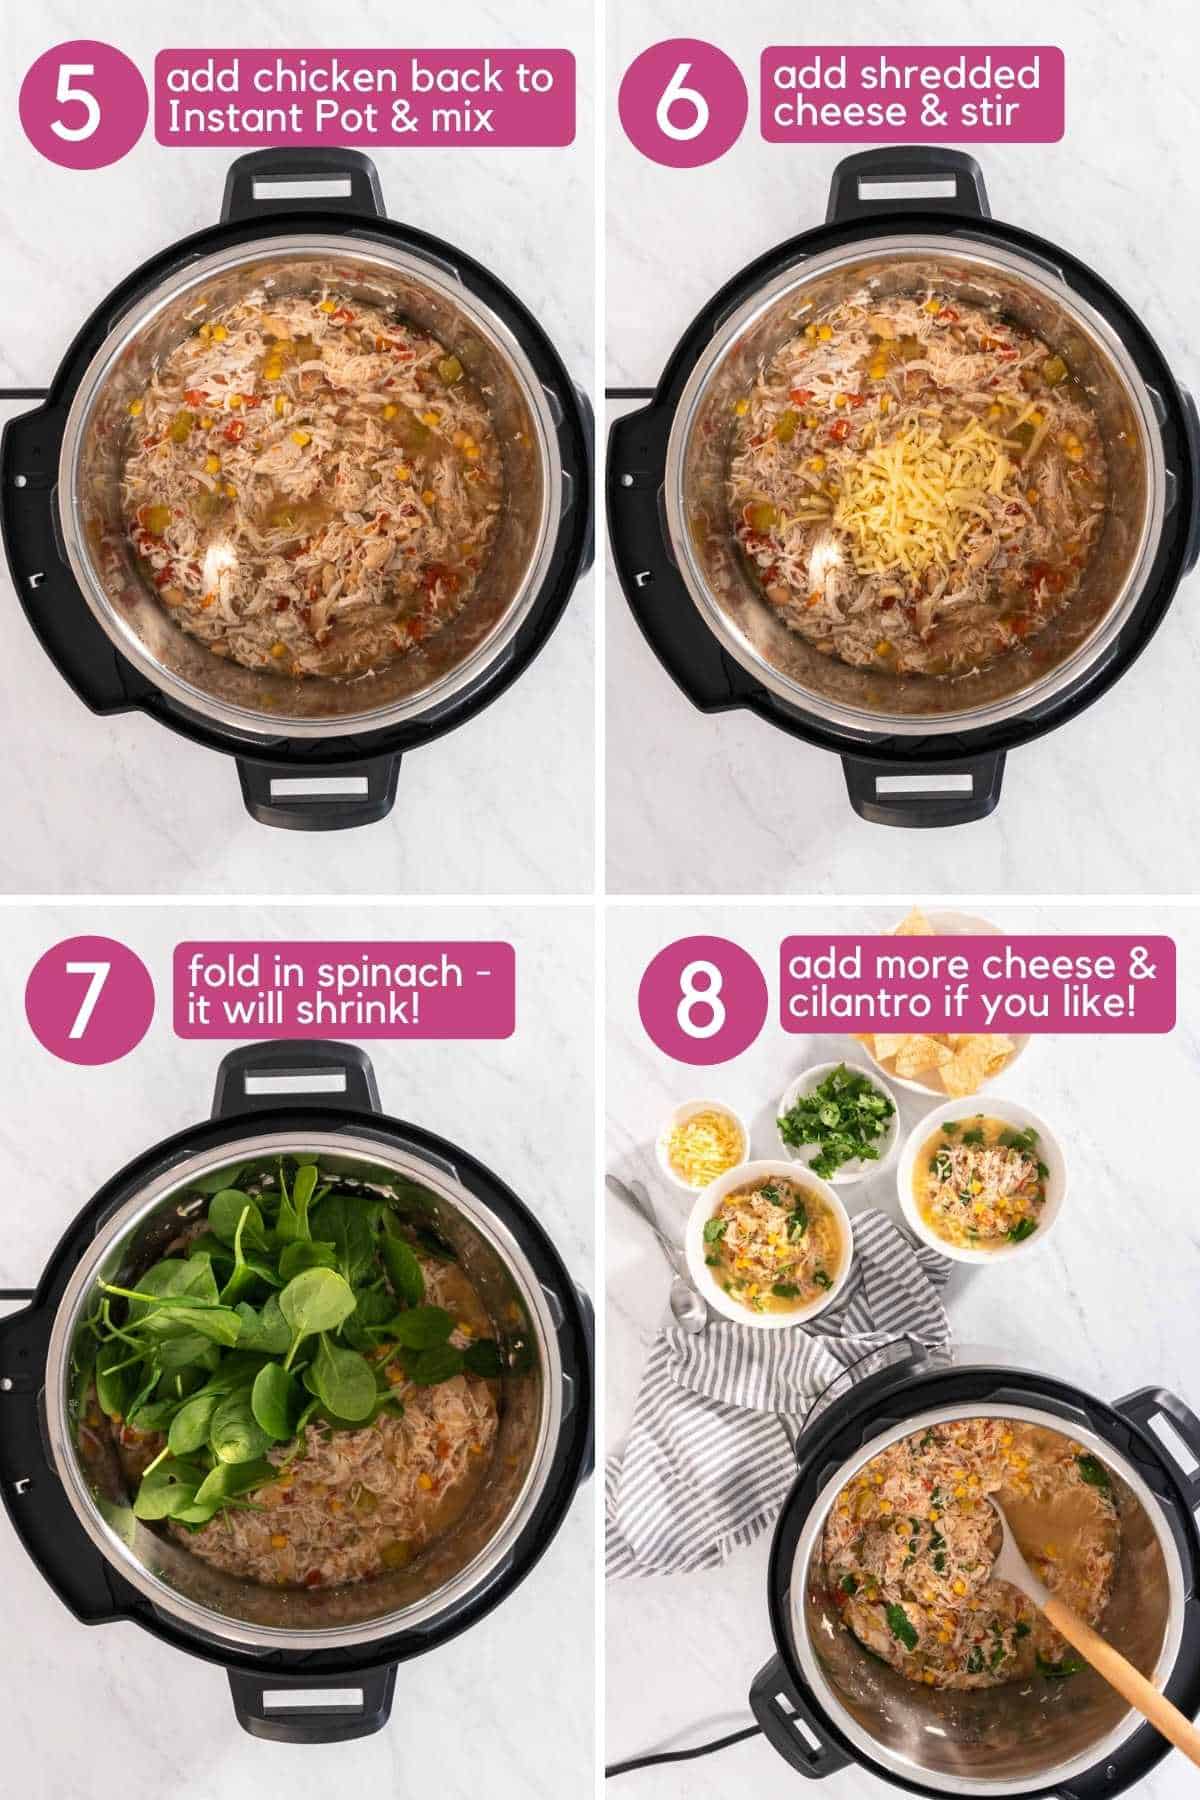 Add chicken back to pot and add shredded cheese and spinach then mix for instant pot white bean chicken chili.